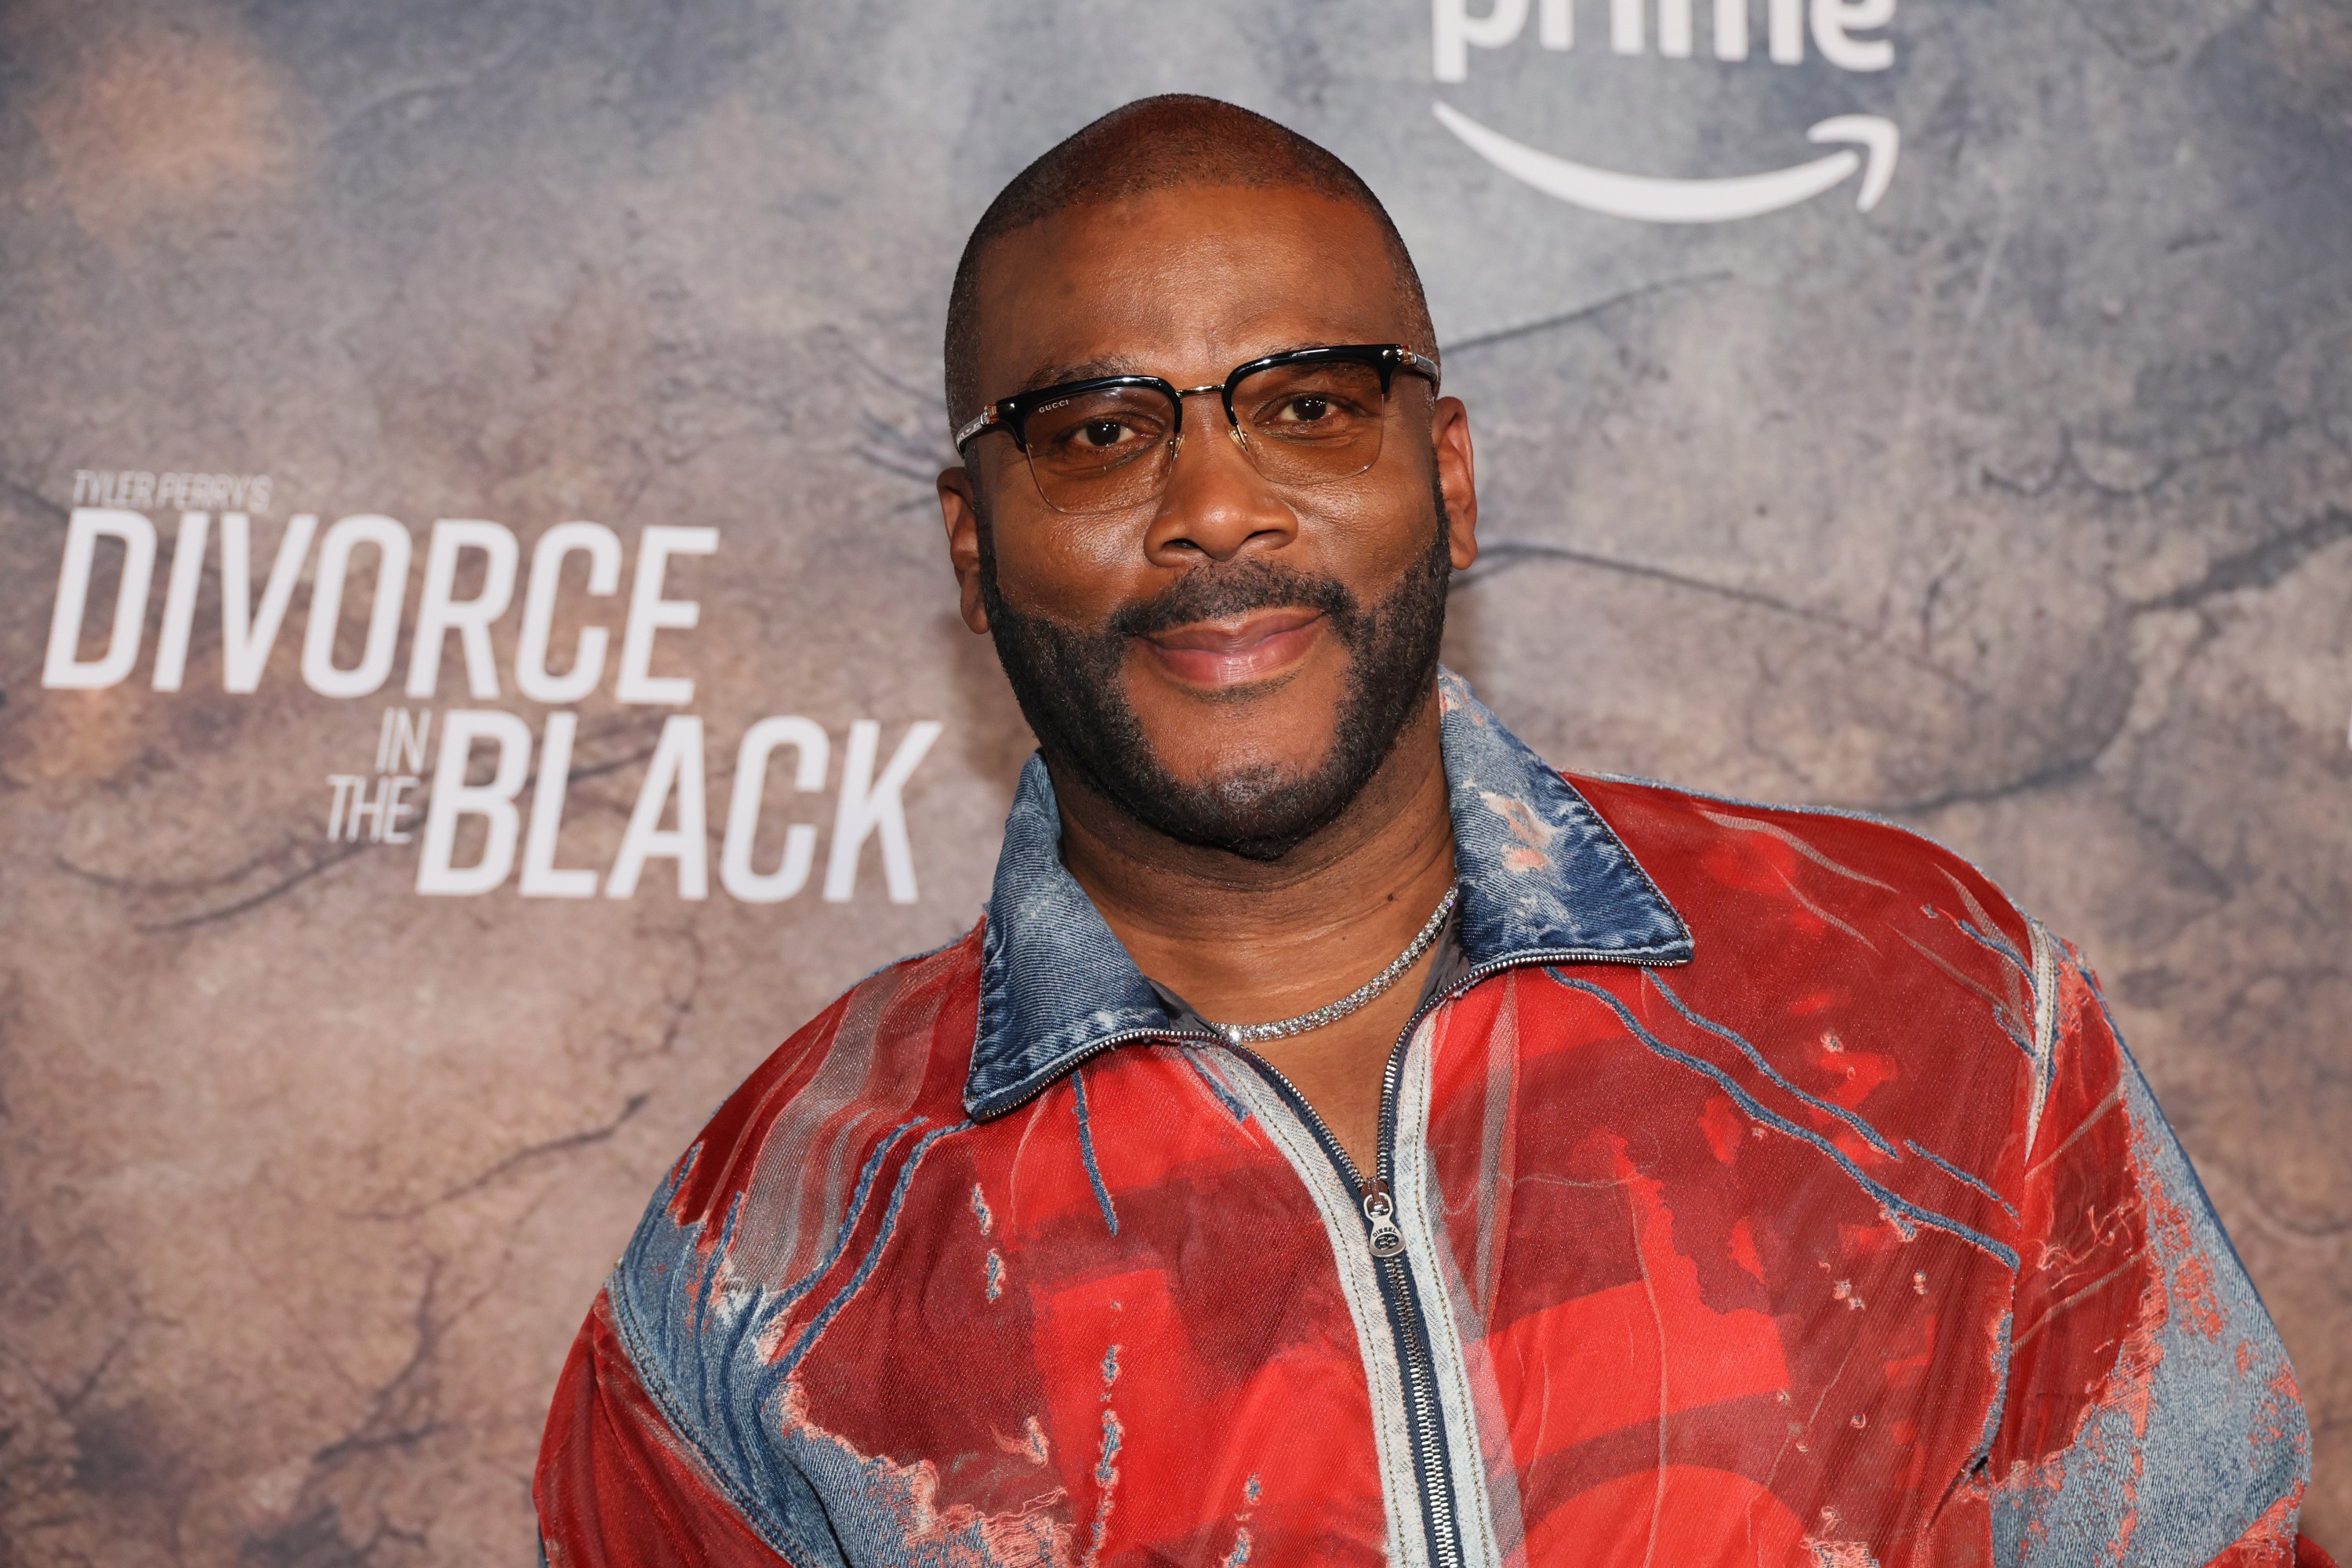 Tyler Perry attends Tyler Perry's 'Divorce In The Black' New York Premiere.